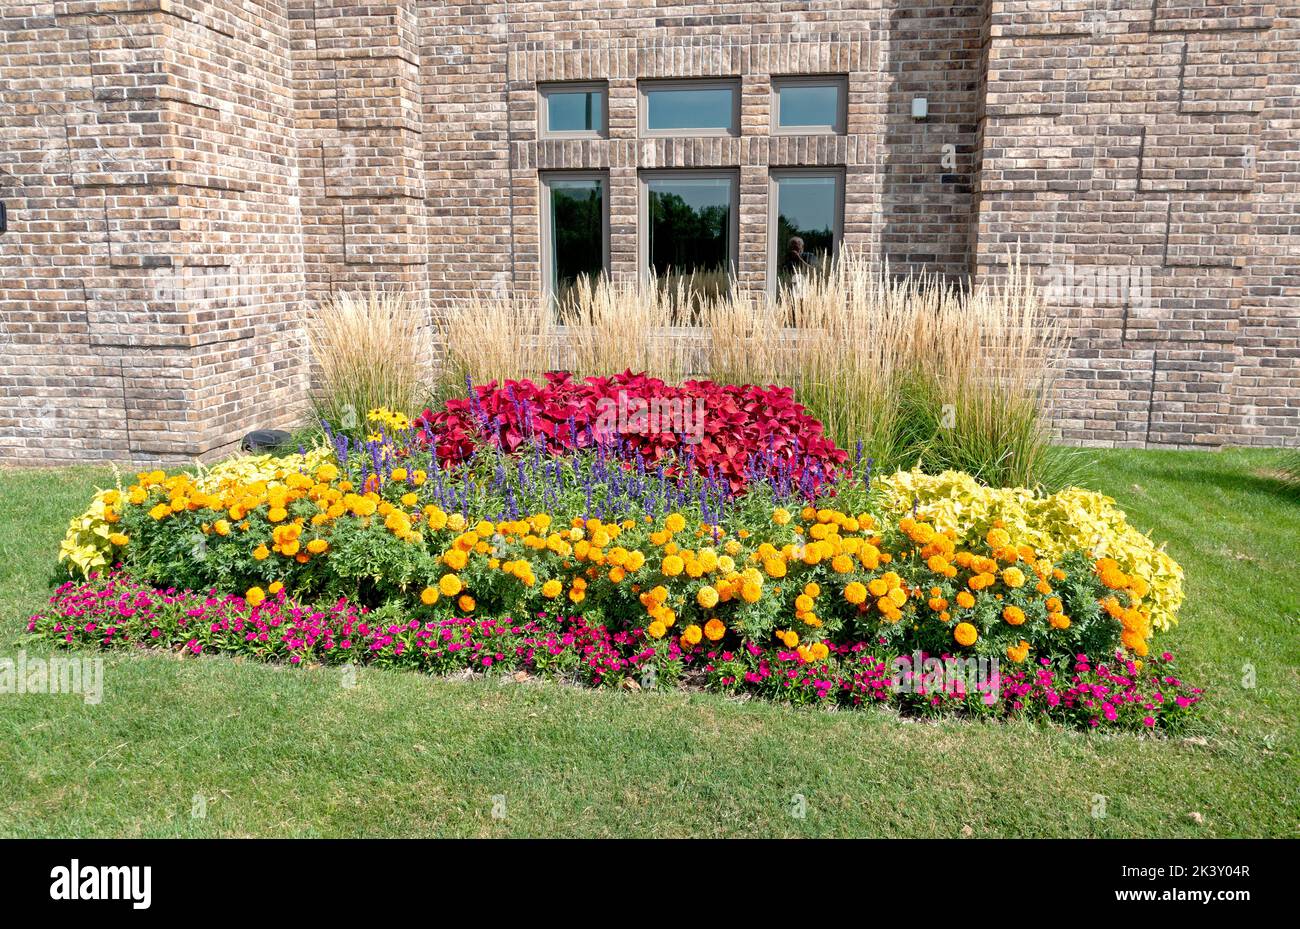 Well manicured flower bed with yellow, red and purple flowers. Brooklyn Center Minnesota MN USA Stock Photo